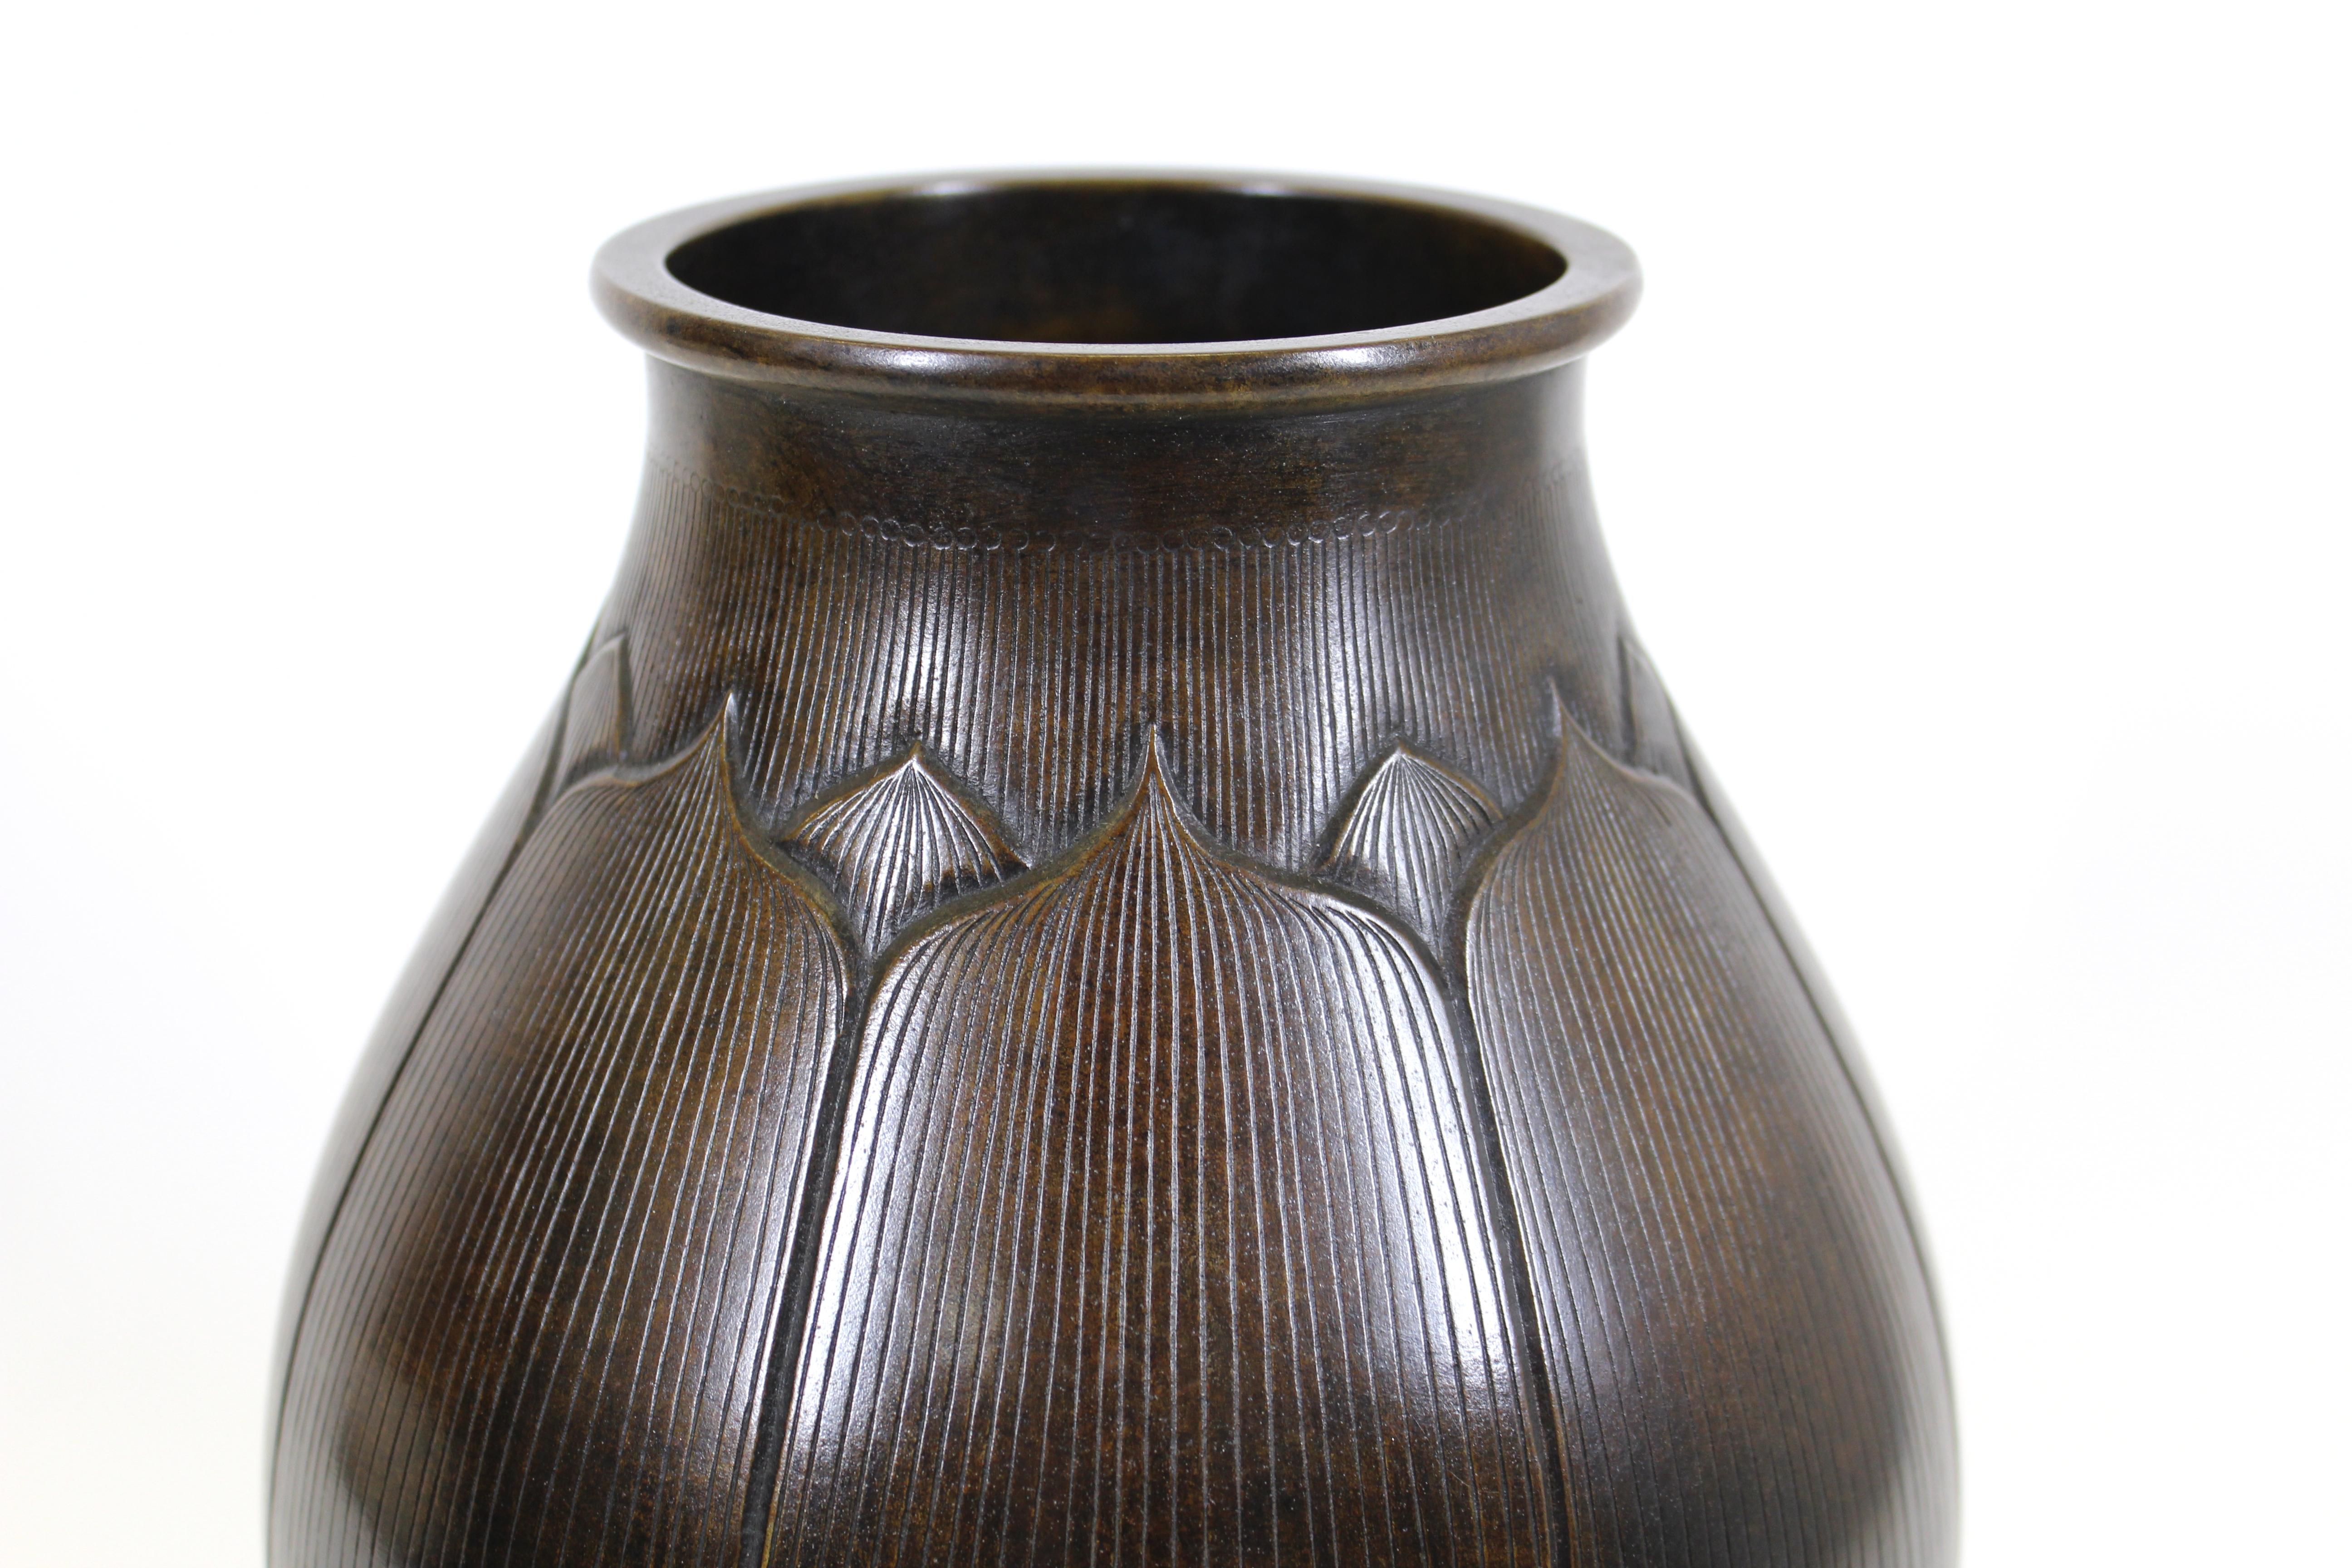 Japanese Meiji period Art Nouveau bronze vase in shape of a lotus, hand incised detailing and rare chocolate brown patina, circa 1900.